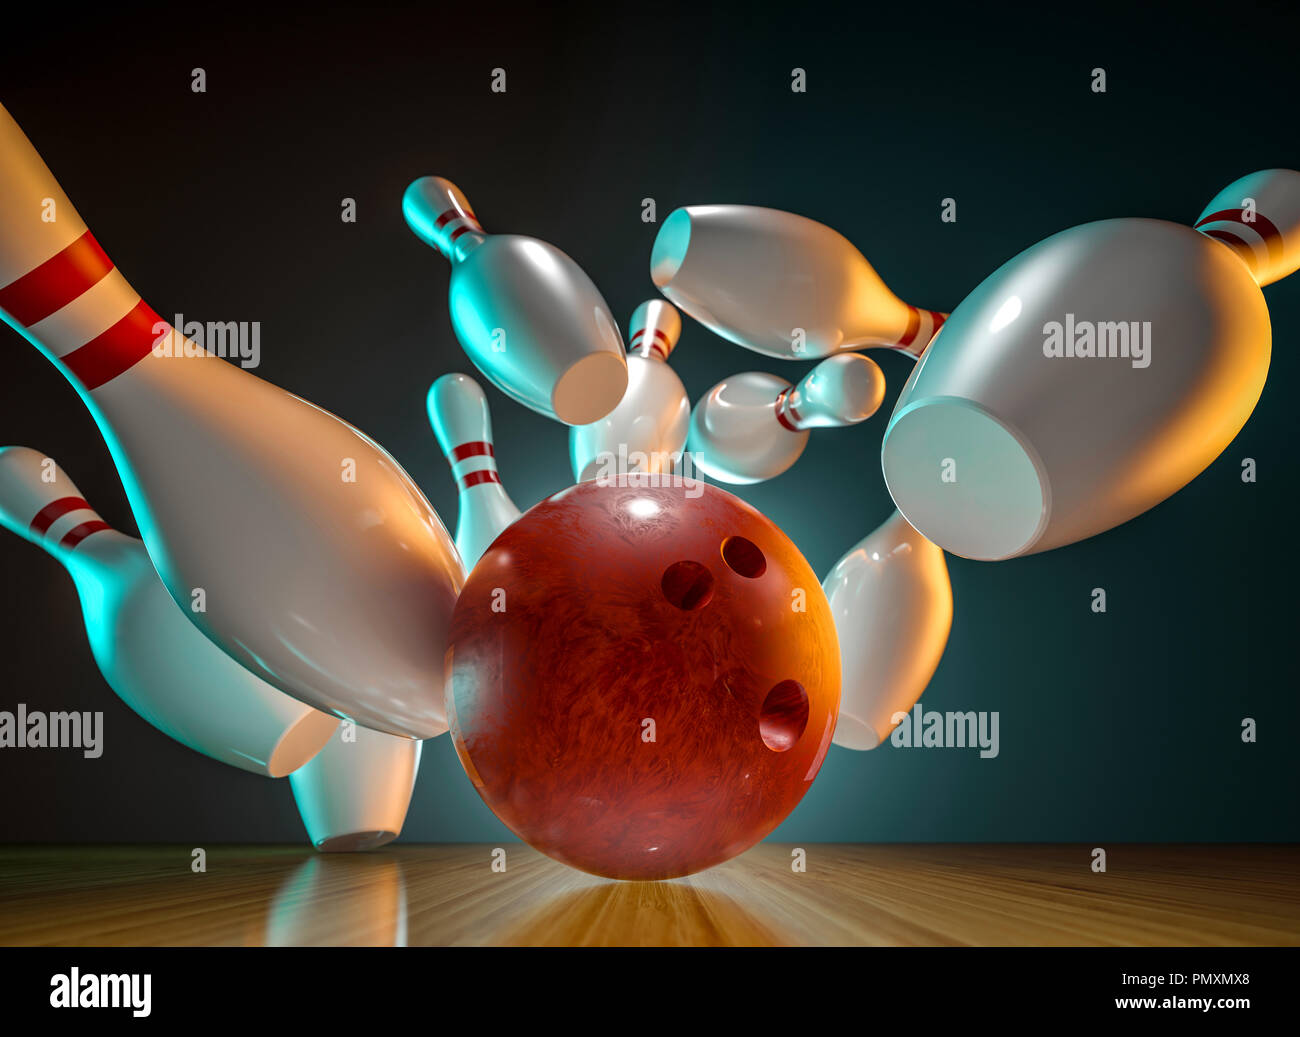 image of bowling action 3d rendering Stock Photo